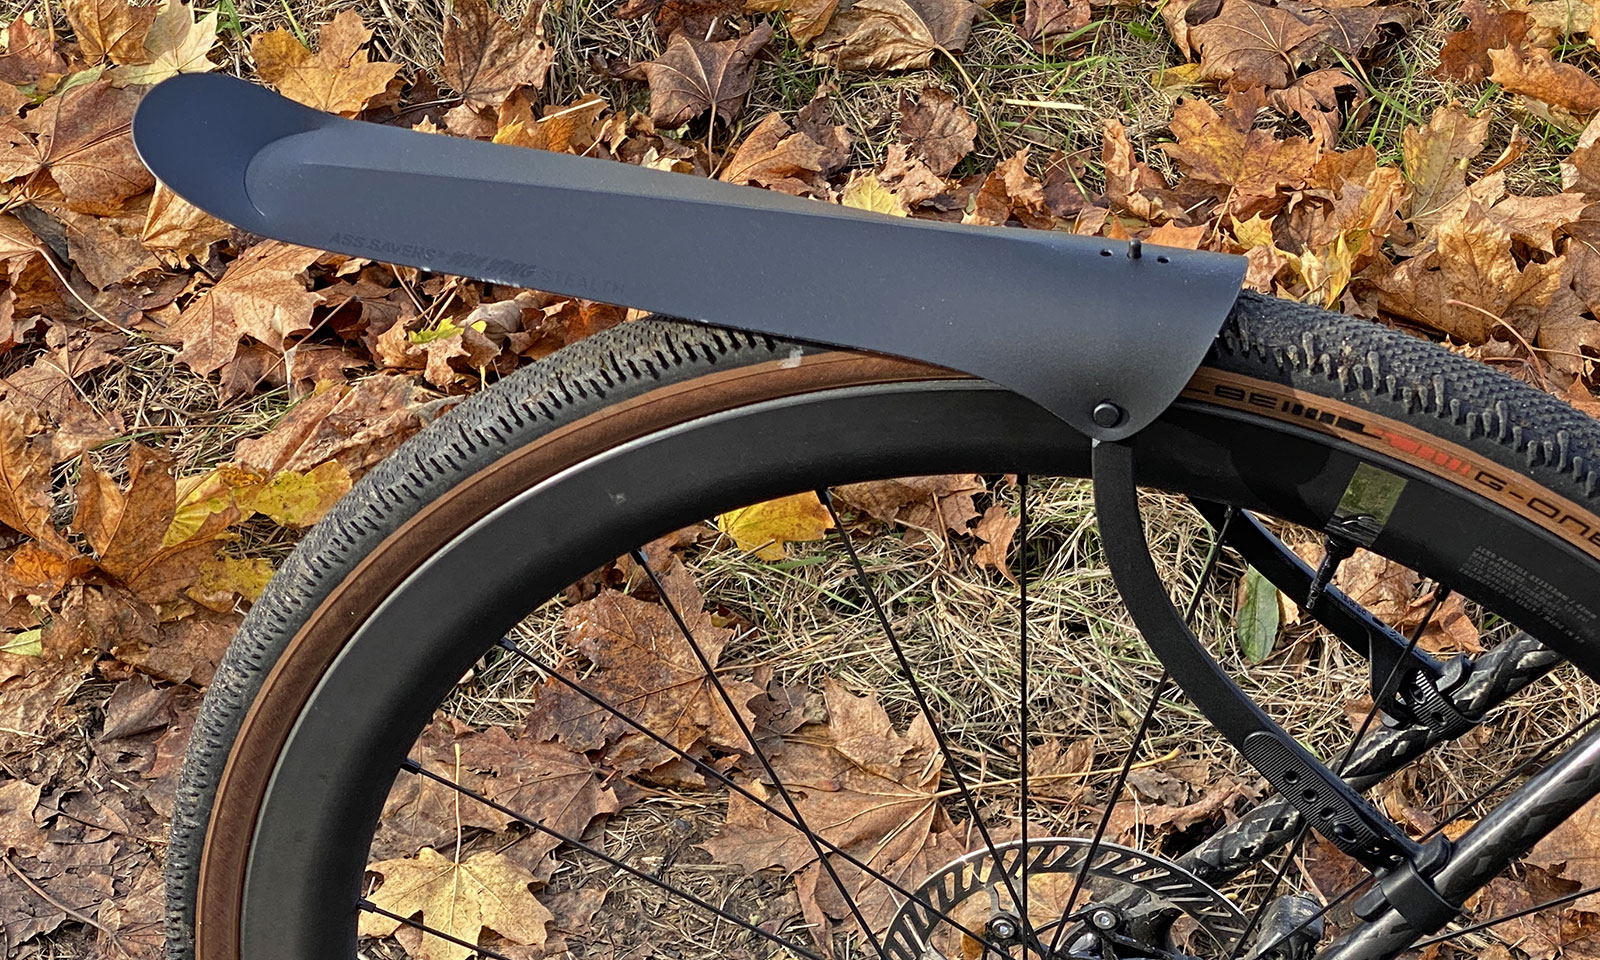 Ass Savers Win Wing 2 updated and improved strap-on gravel bike fender, side